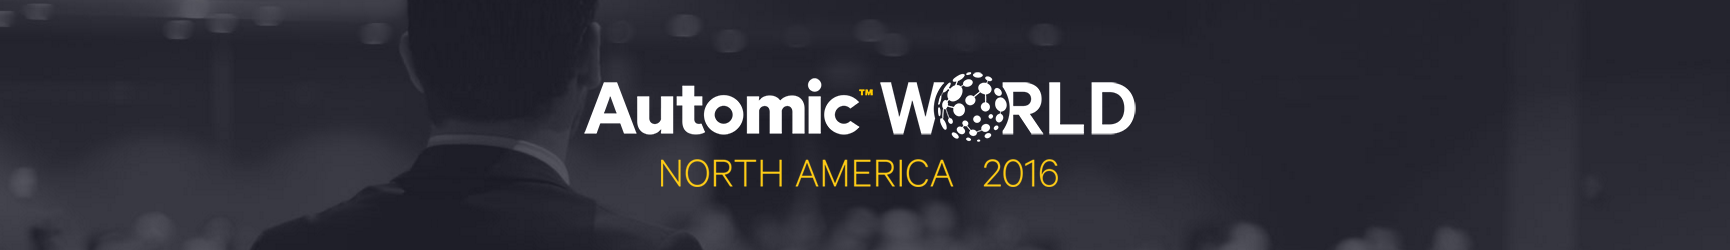 Banner of the Automic World North America